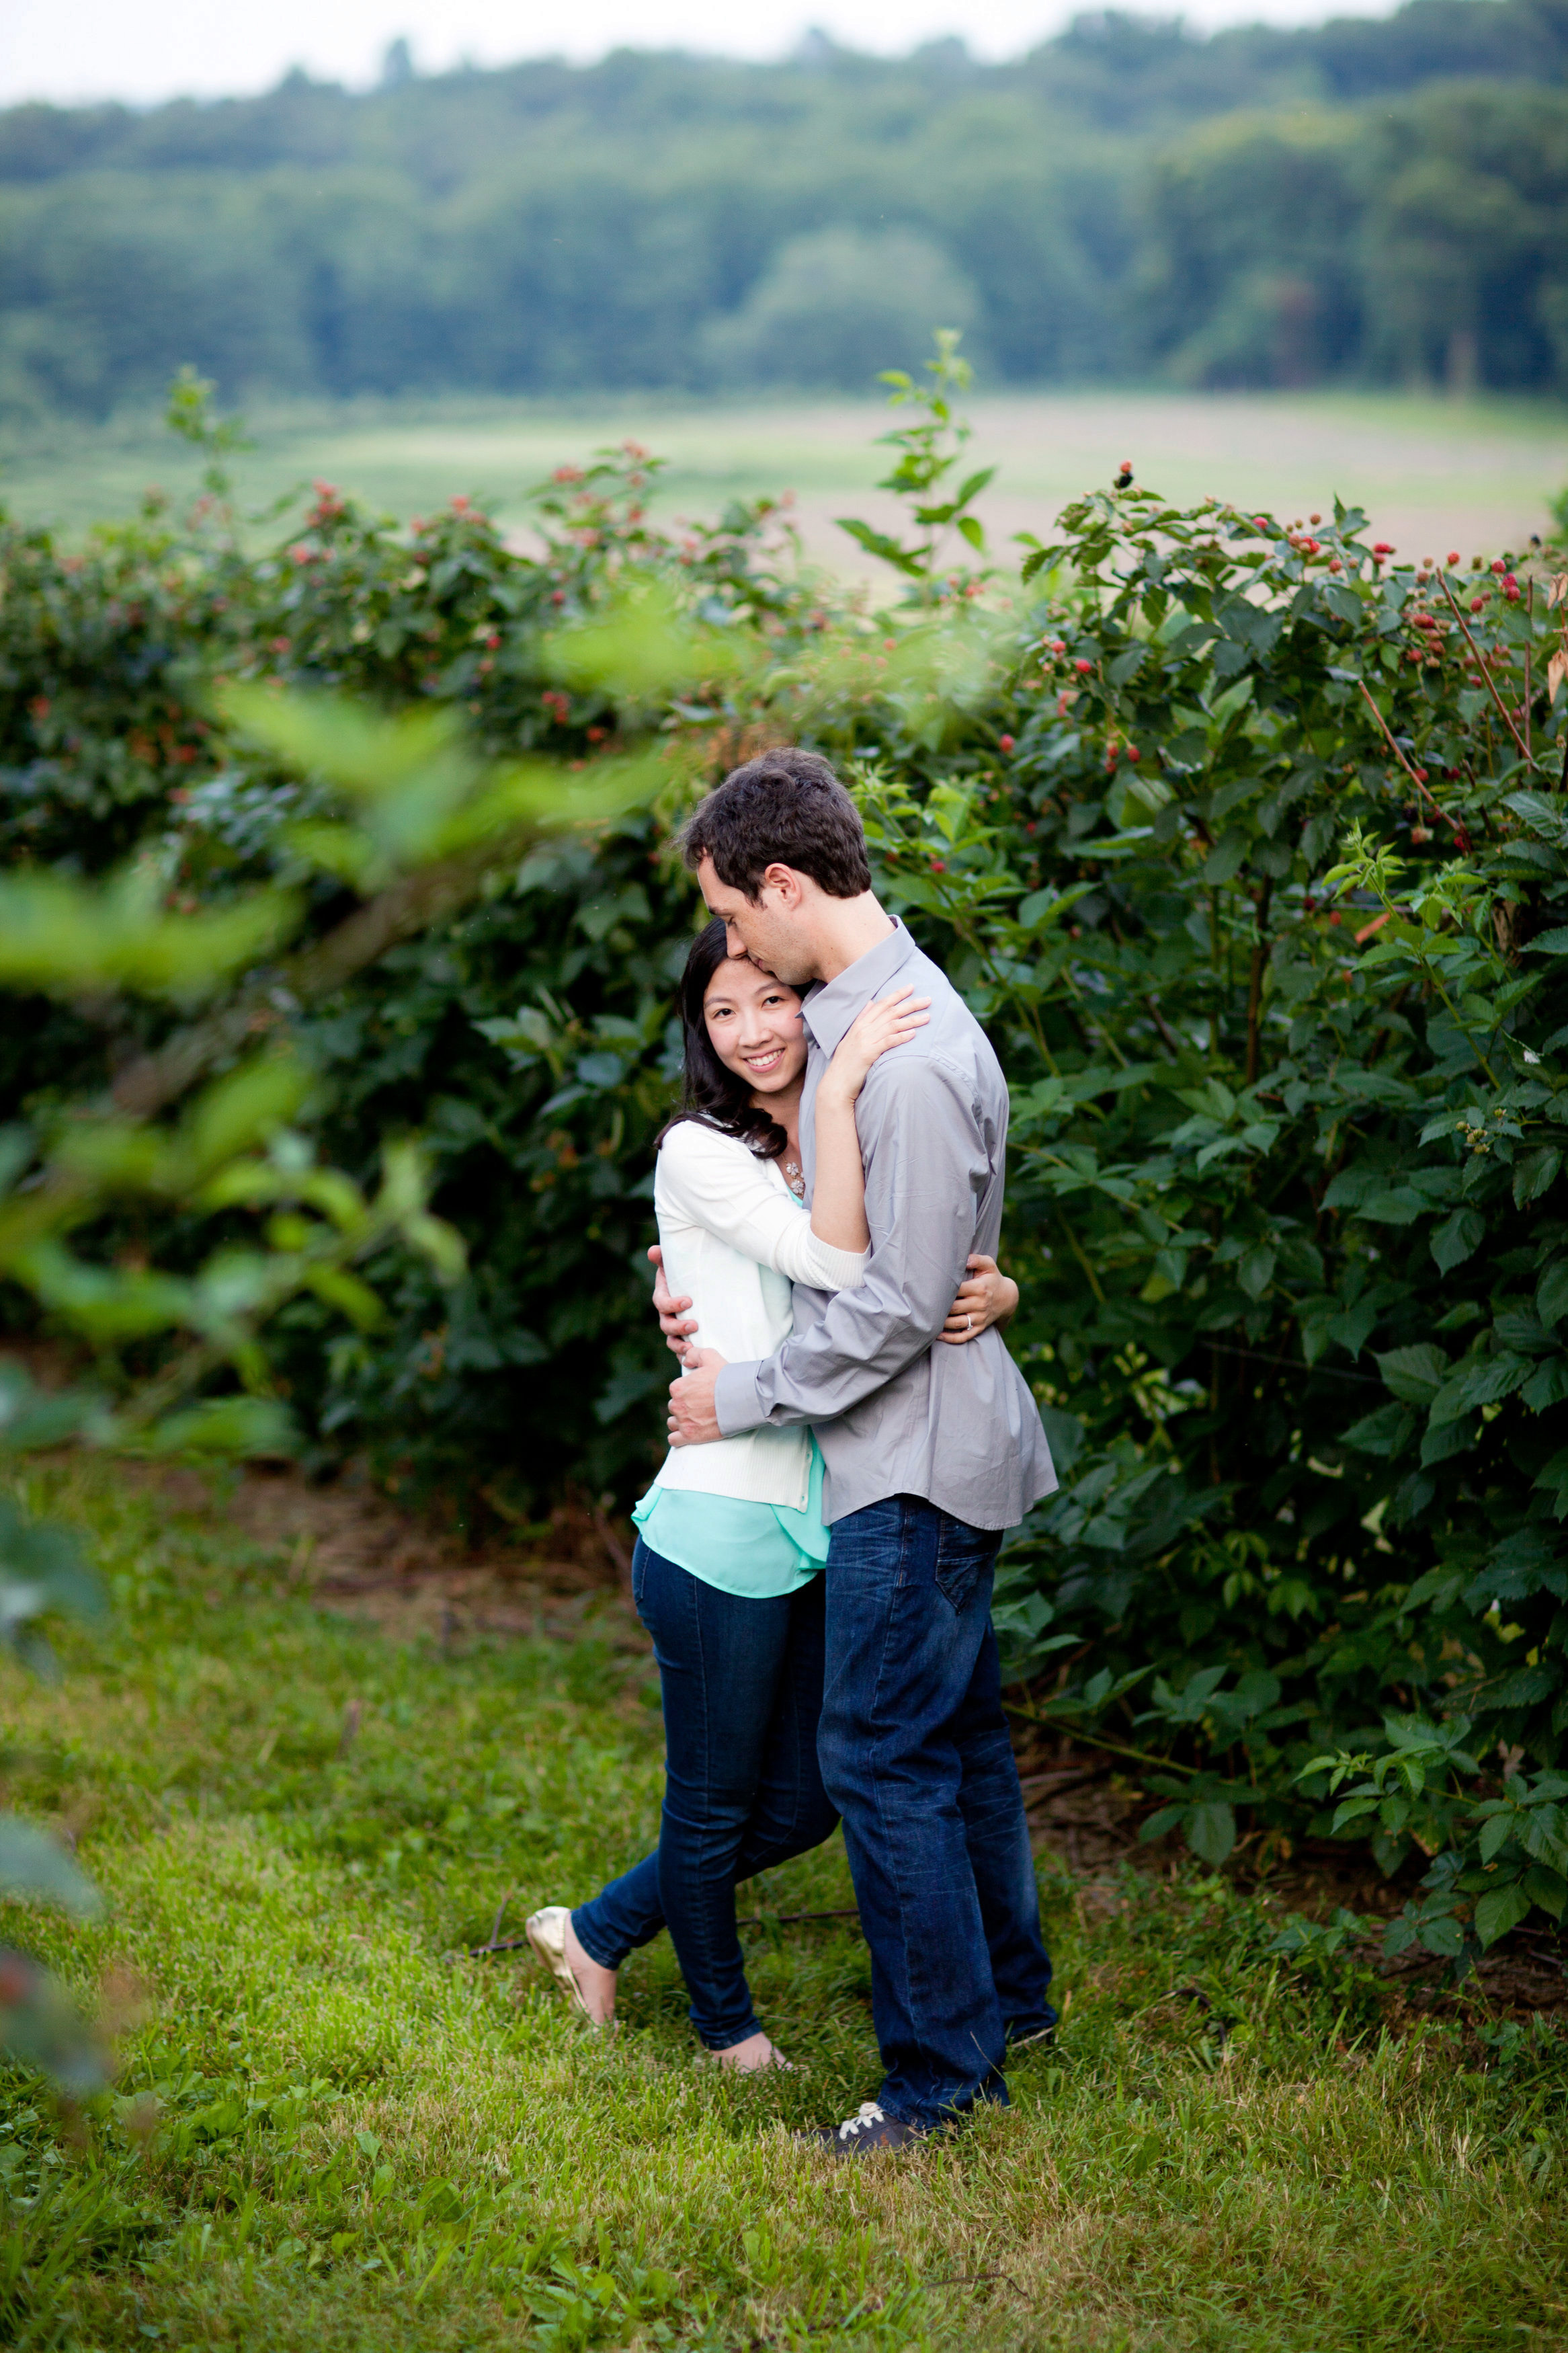 Butler's Orchard Engagement Session Photos by Liz and Ryan Farm Engagement Session Pick Your Own Farm Blueberries Blueberry Soda Blueberry Beer Picnic Engagement Session Maryland Wedding and Engagement Photography Pick Your Own Blueberries Pick Your Own Flowers Flower Fields Photos by Liz and Ryan (7)